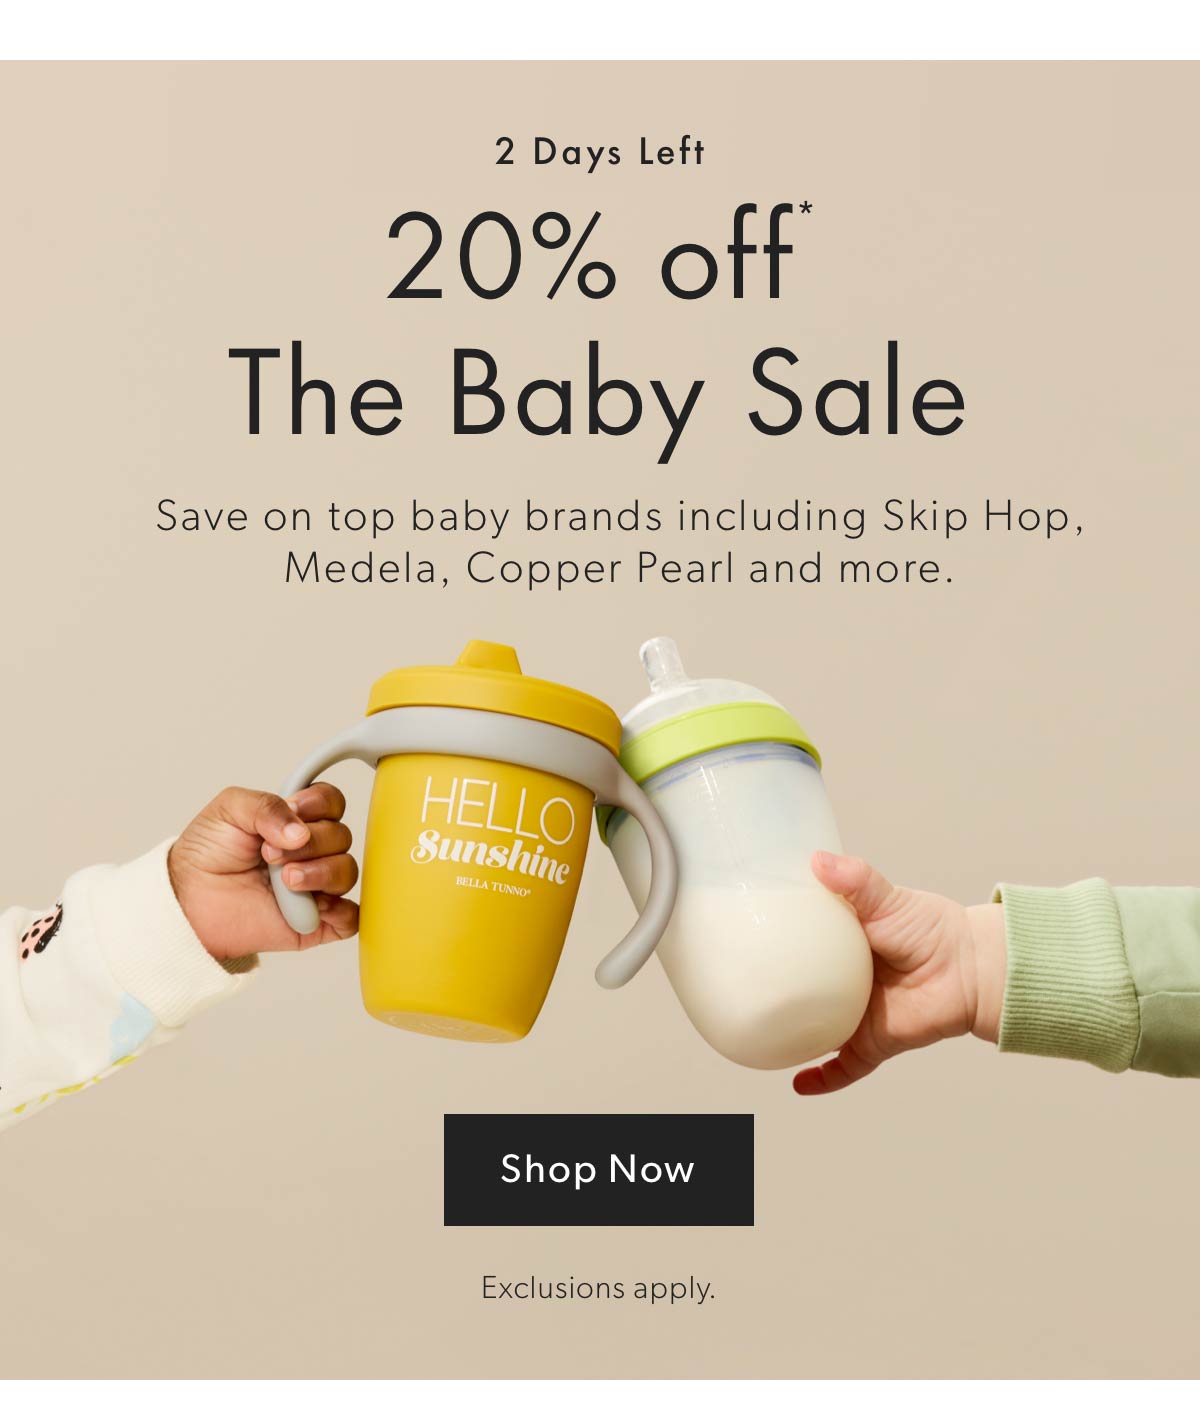 25% off the Baby Sale